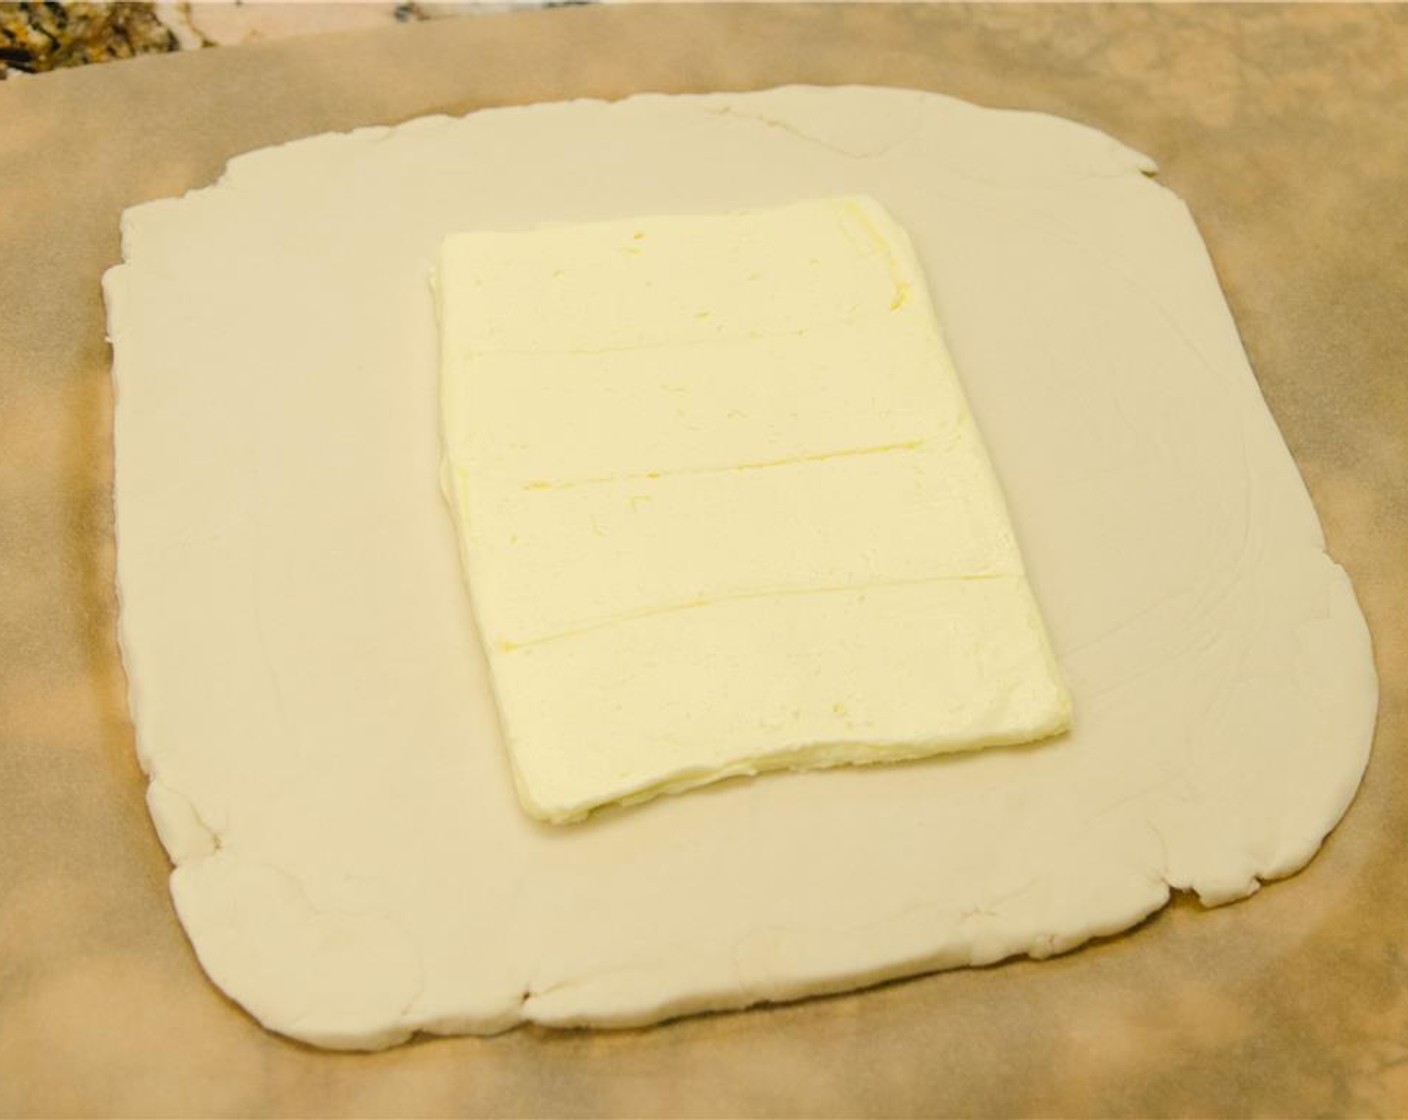 step 7 Remove the top layer of plastic or parchment from the dough and unwrap the butter block.  Place the butter block in the center of the dough square.